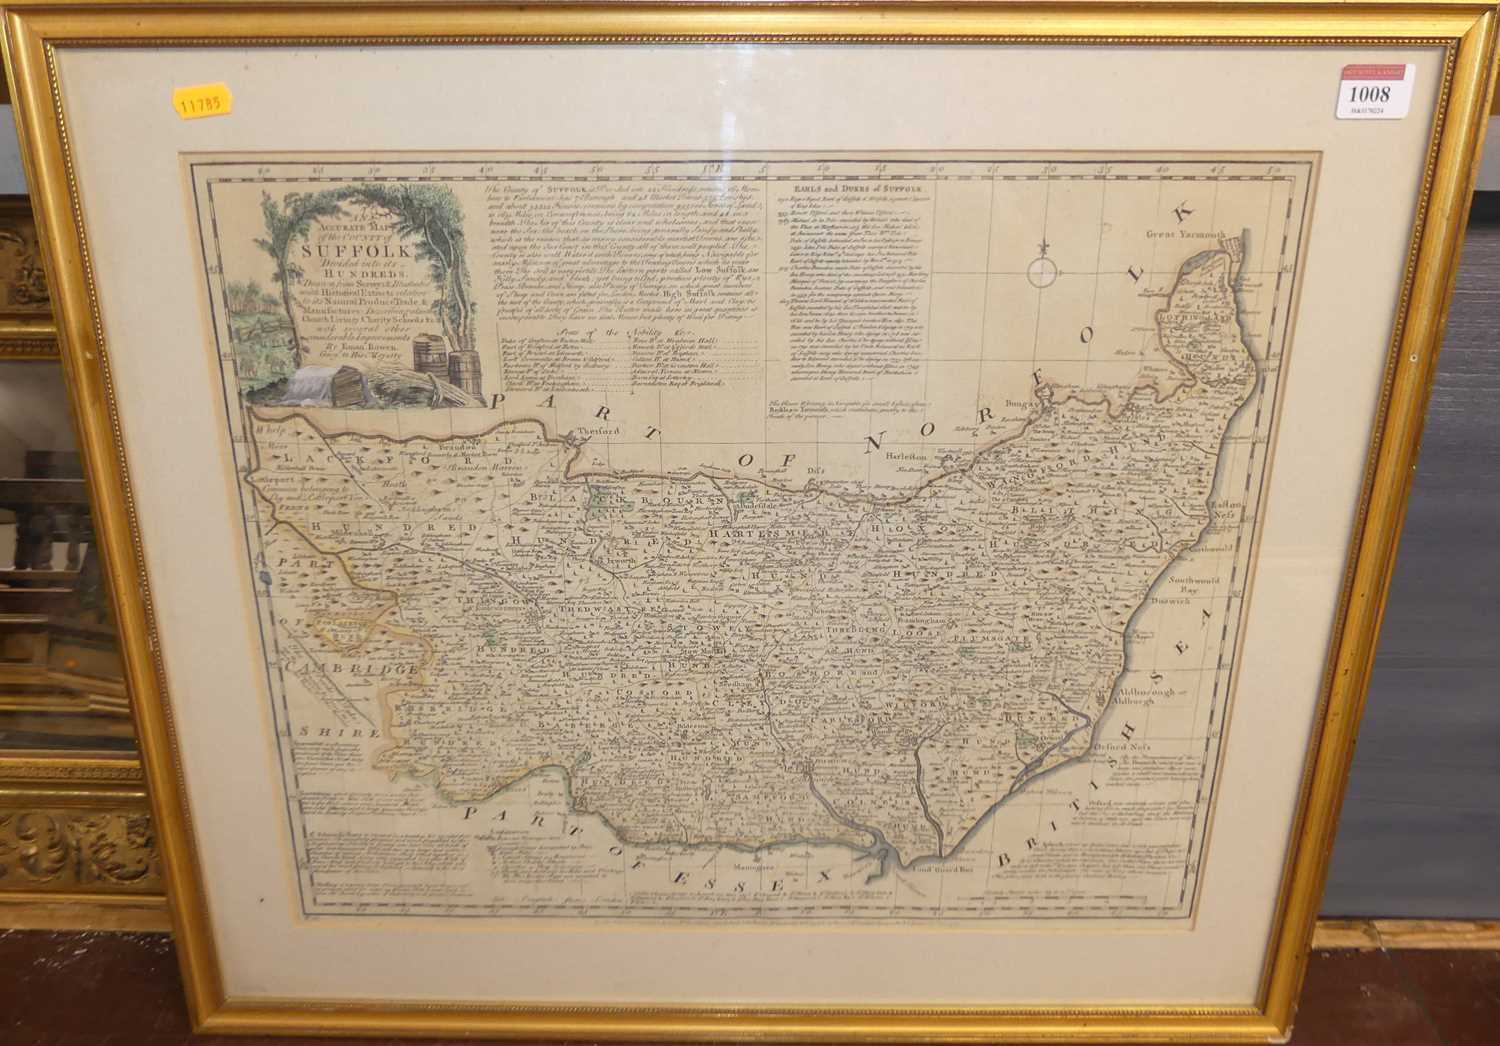 Emmanuel Bowen - An Accurate Map of the County of Suffolk, colour engraving, published London